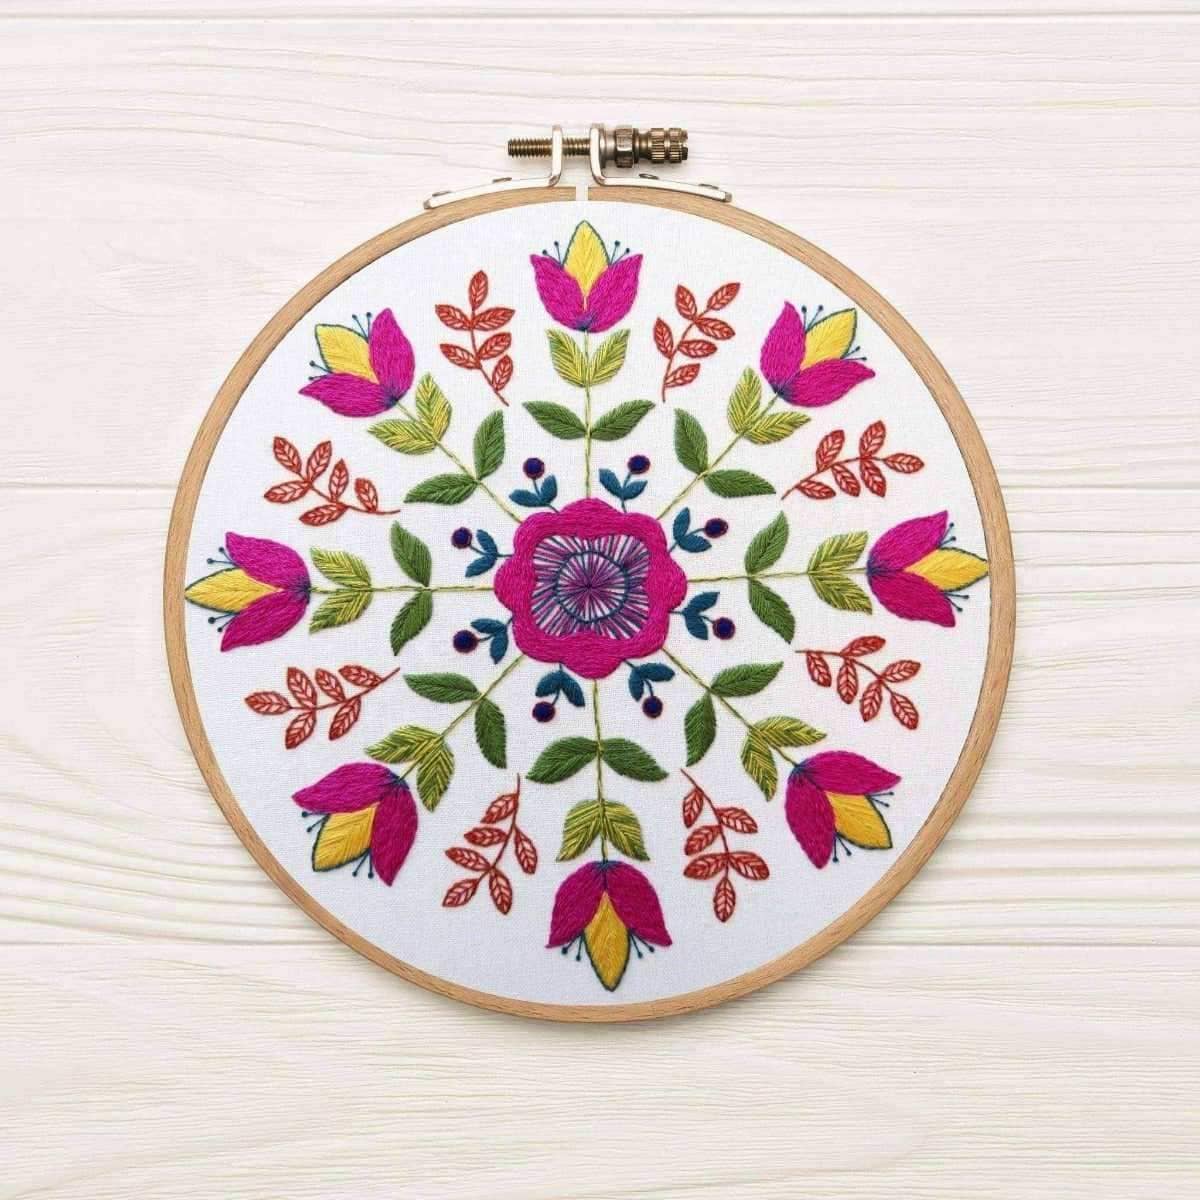 Florally, Pre Printed Embroidery Fabric Panel PLUS PDF Pattern , Pre Printed Fabric Pattern , StitchDoodles , embroidery hoop kit, embroidery kits for adults, embroidery kits for beginners, flower embroidery, hand embroidery, hand embroidery fabric, hand embroidery kit, modern embroidery kits, PDF pattern, unique embroidery kits , StitchDoodles , shop.stitchdoodles.com